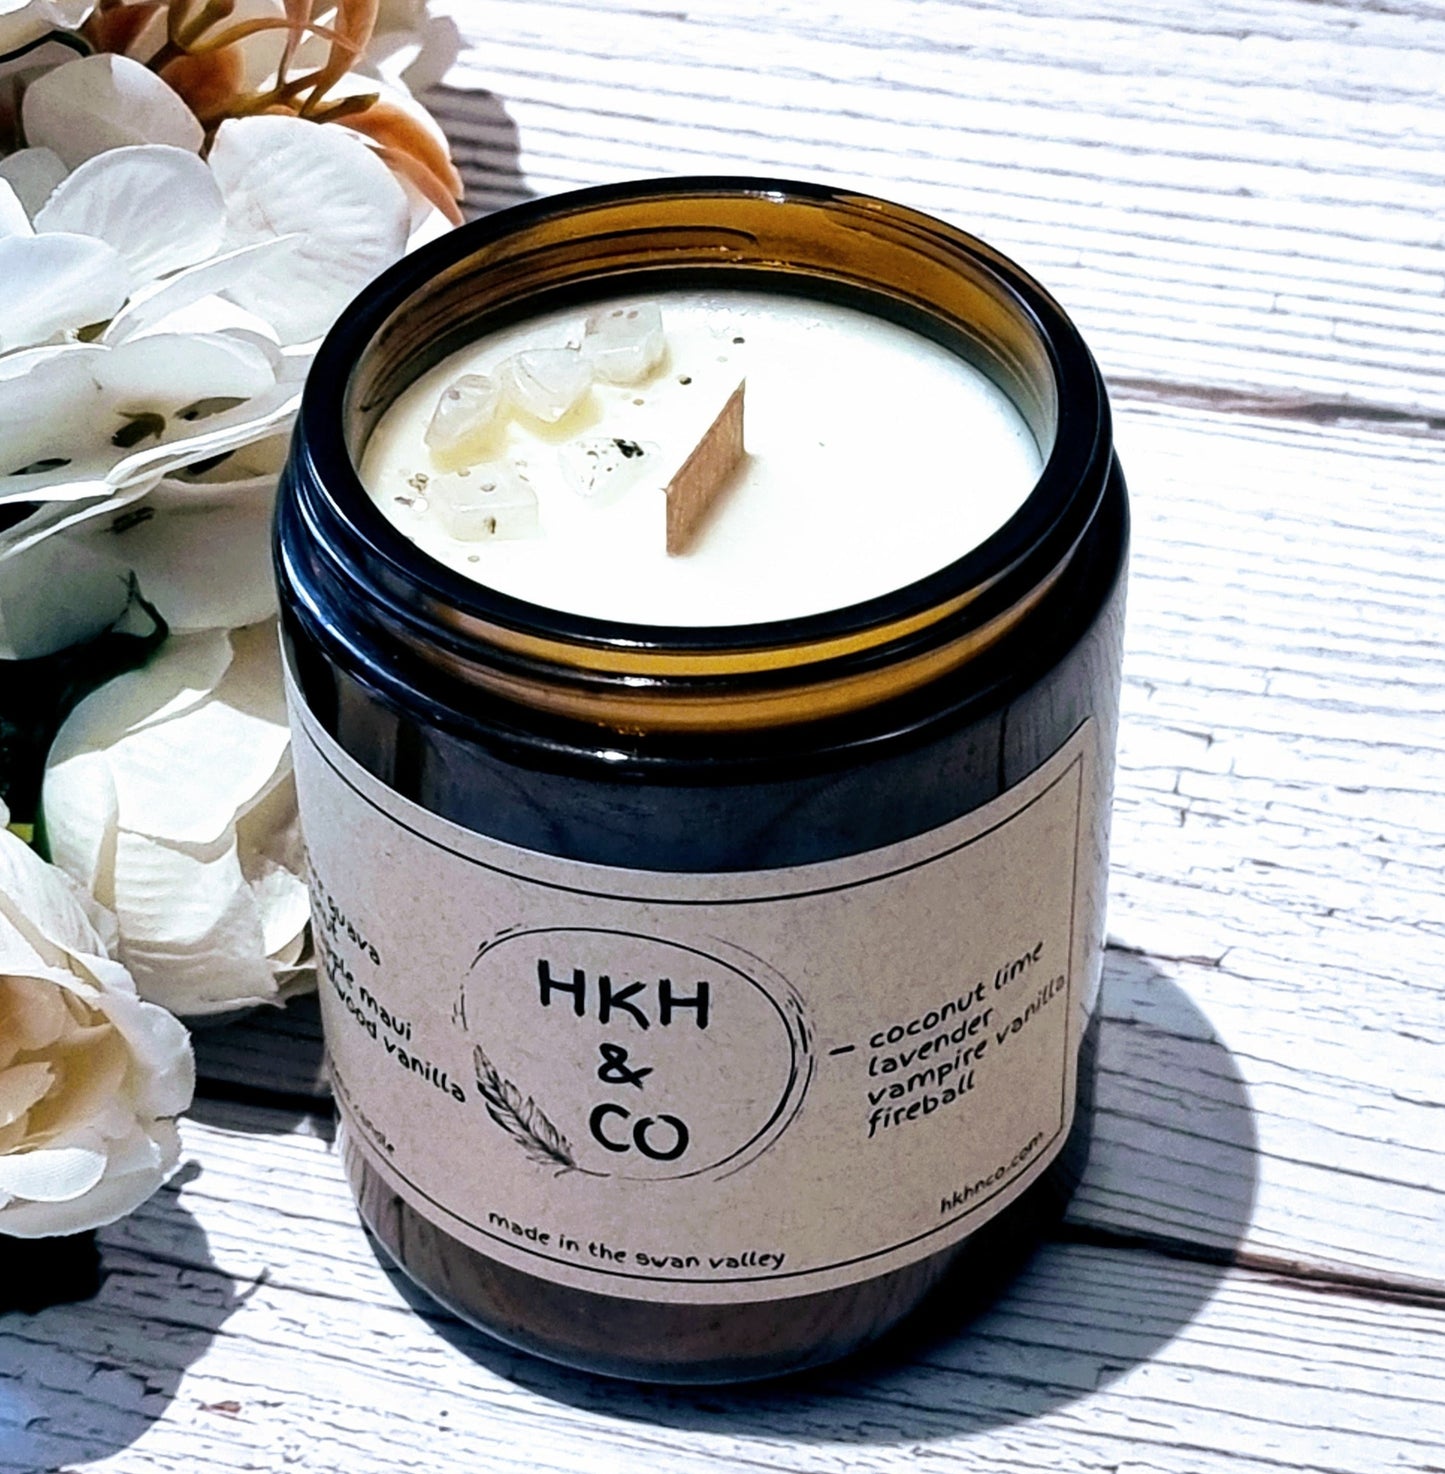 Amber Jar 250 | Scented Soy Wax Candles | Hkhnco